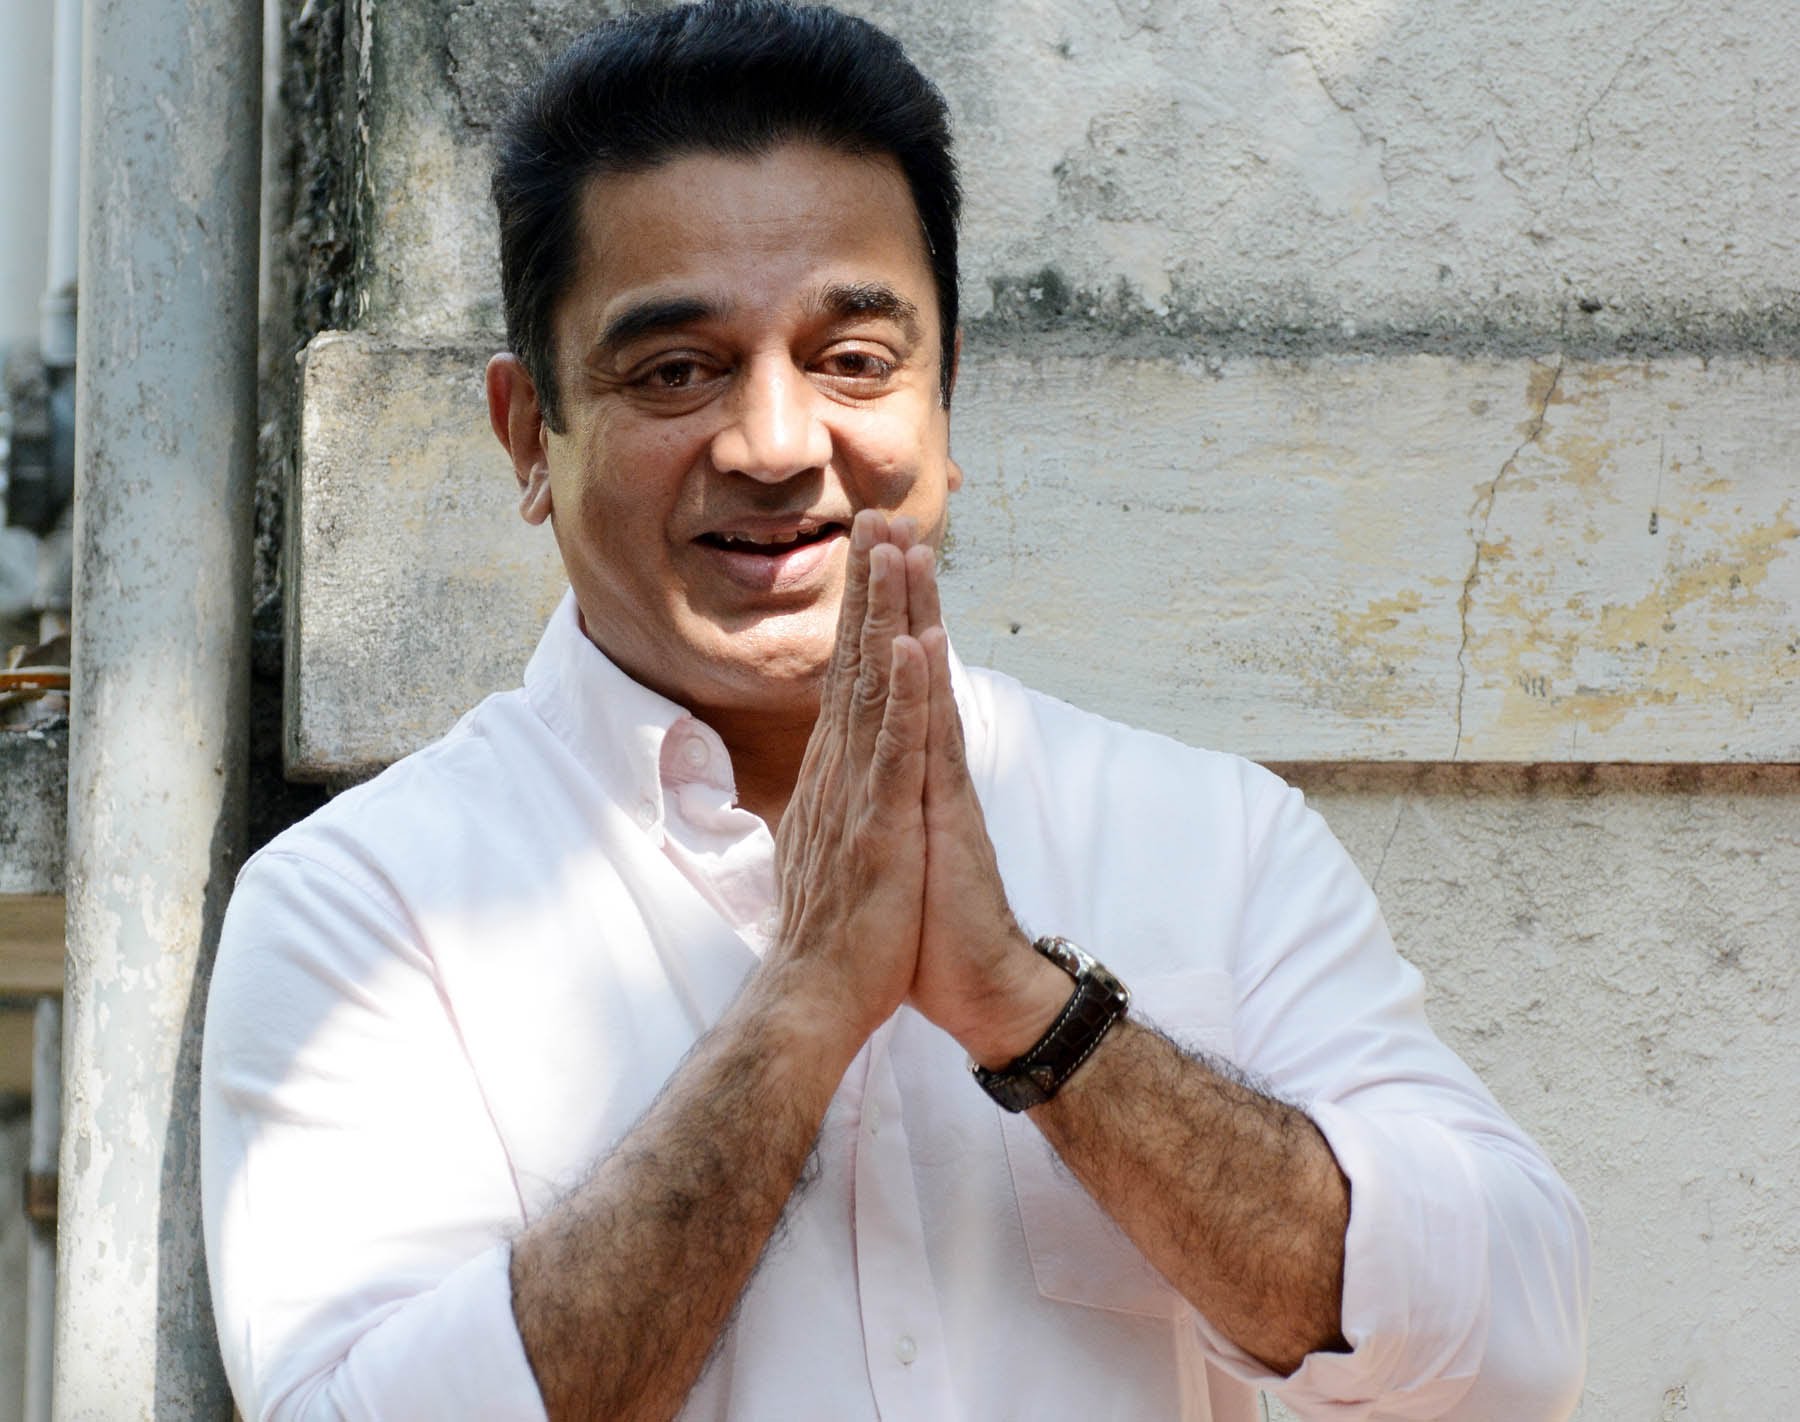 On Kamal Haasan’s 62nd birthday, his most underrated films